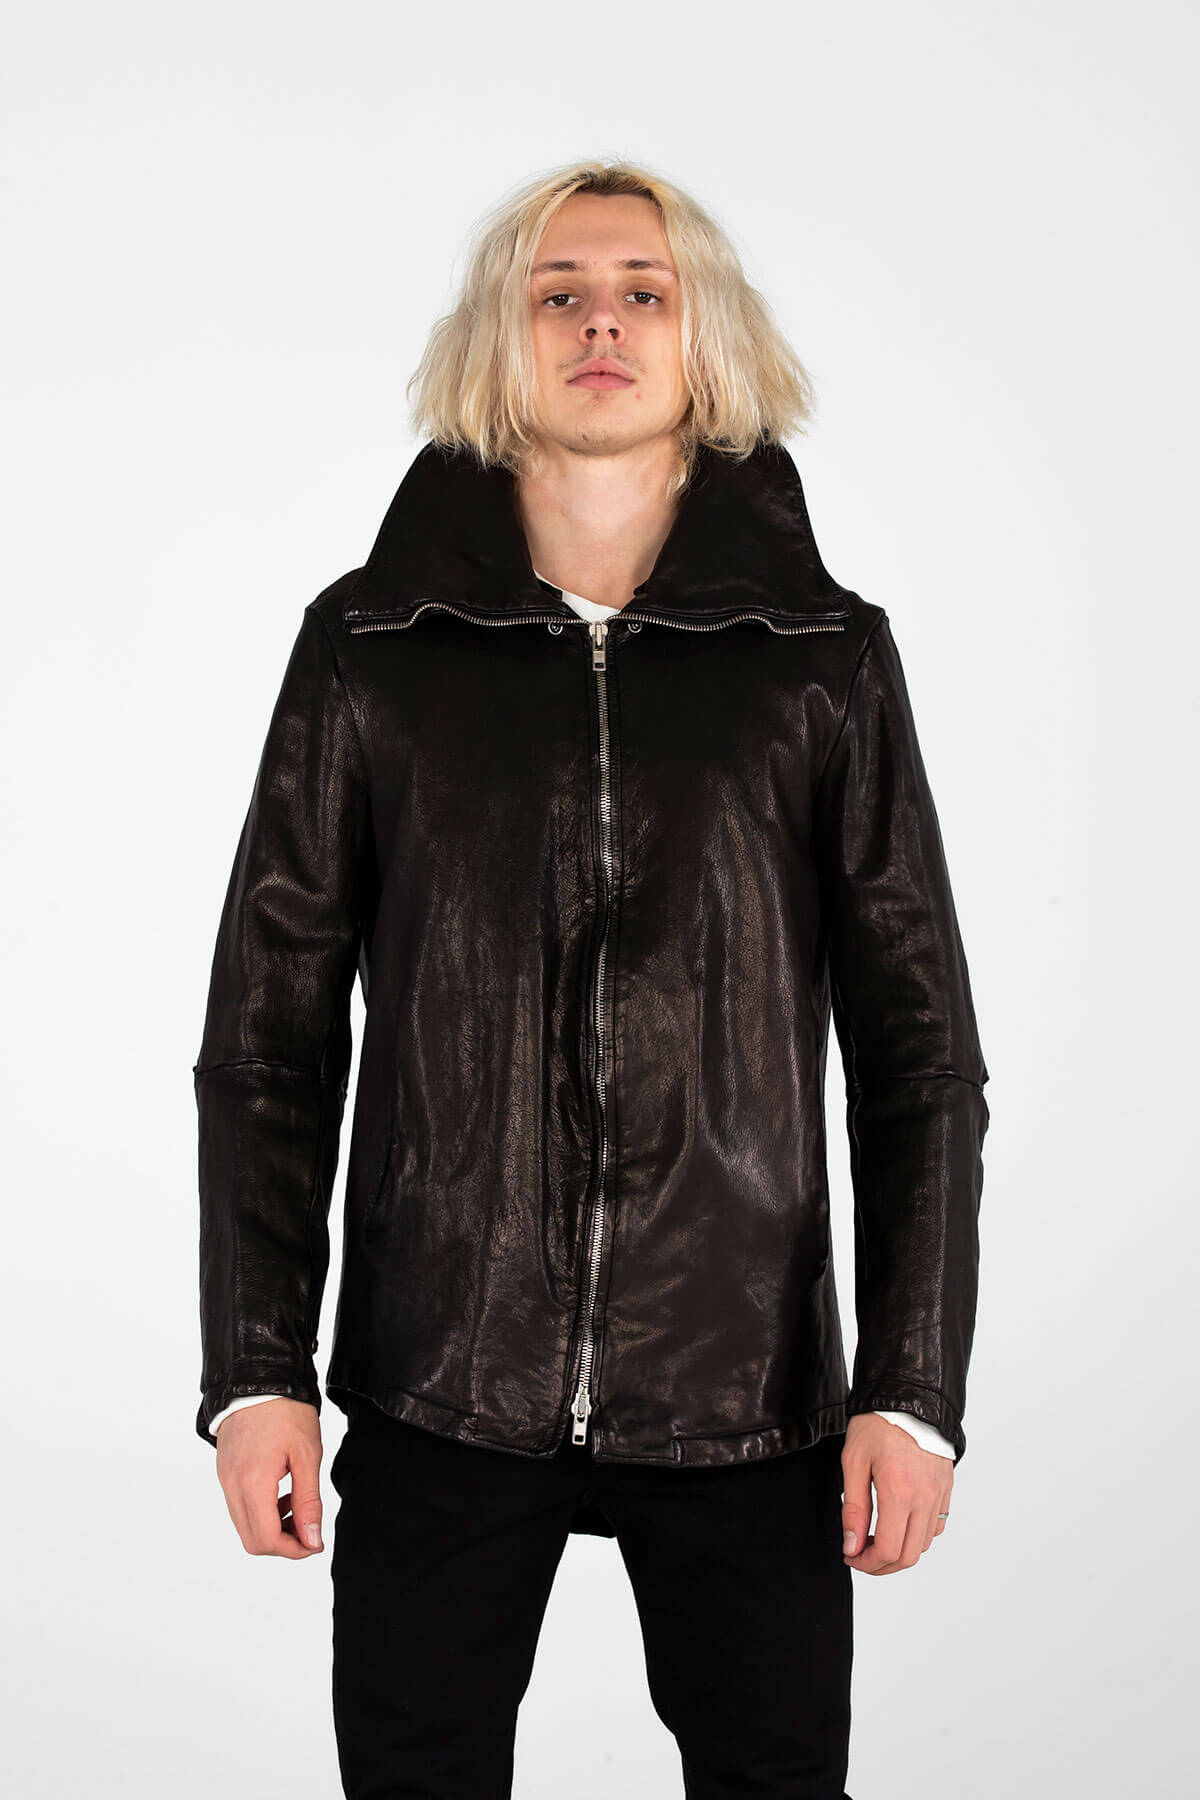 CLASSIC LEATHER JACKET - HAND CRAFTED - ARCHIVE JACKET - MJB